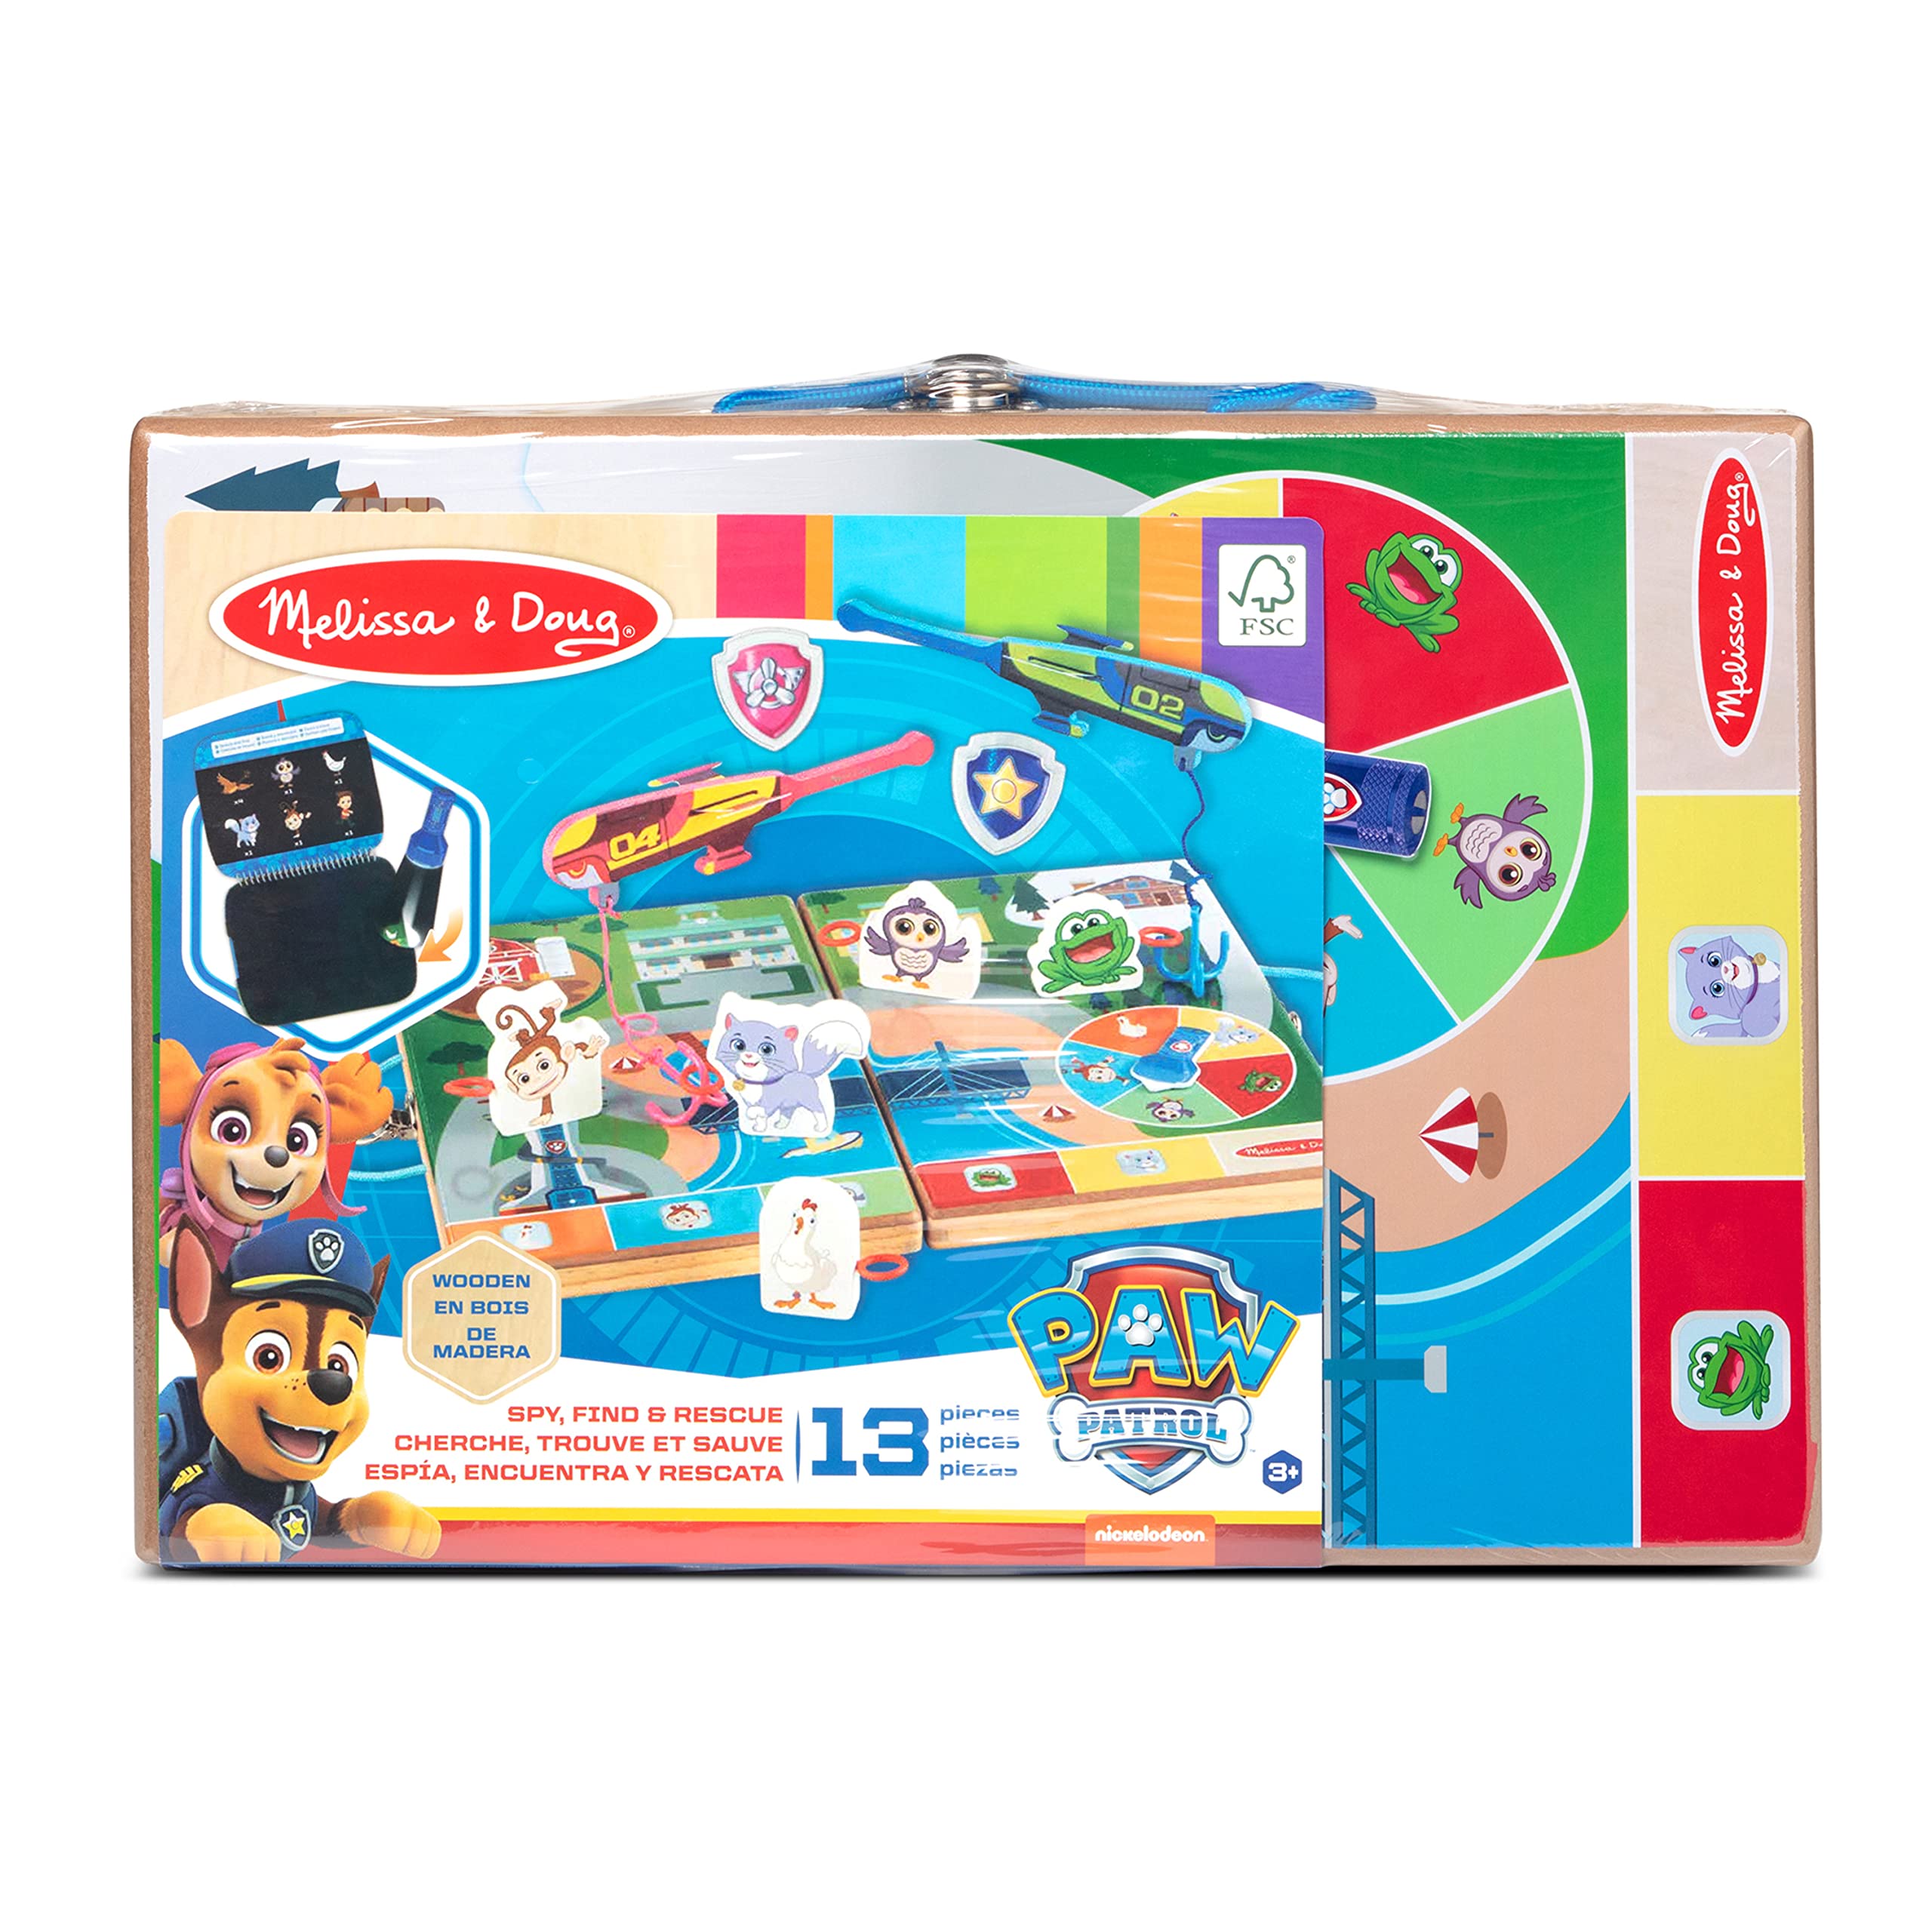 Melissa & Doug Paw Patrol 2 Spy, Find, & Rescue - PAW Patrol Travel Game, Portable Games, Toys For Kids Ages 3+ - FSC-Certified Materials